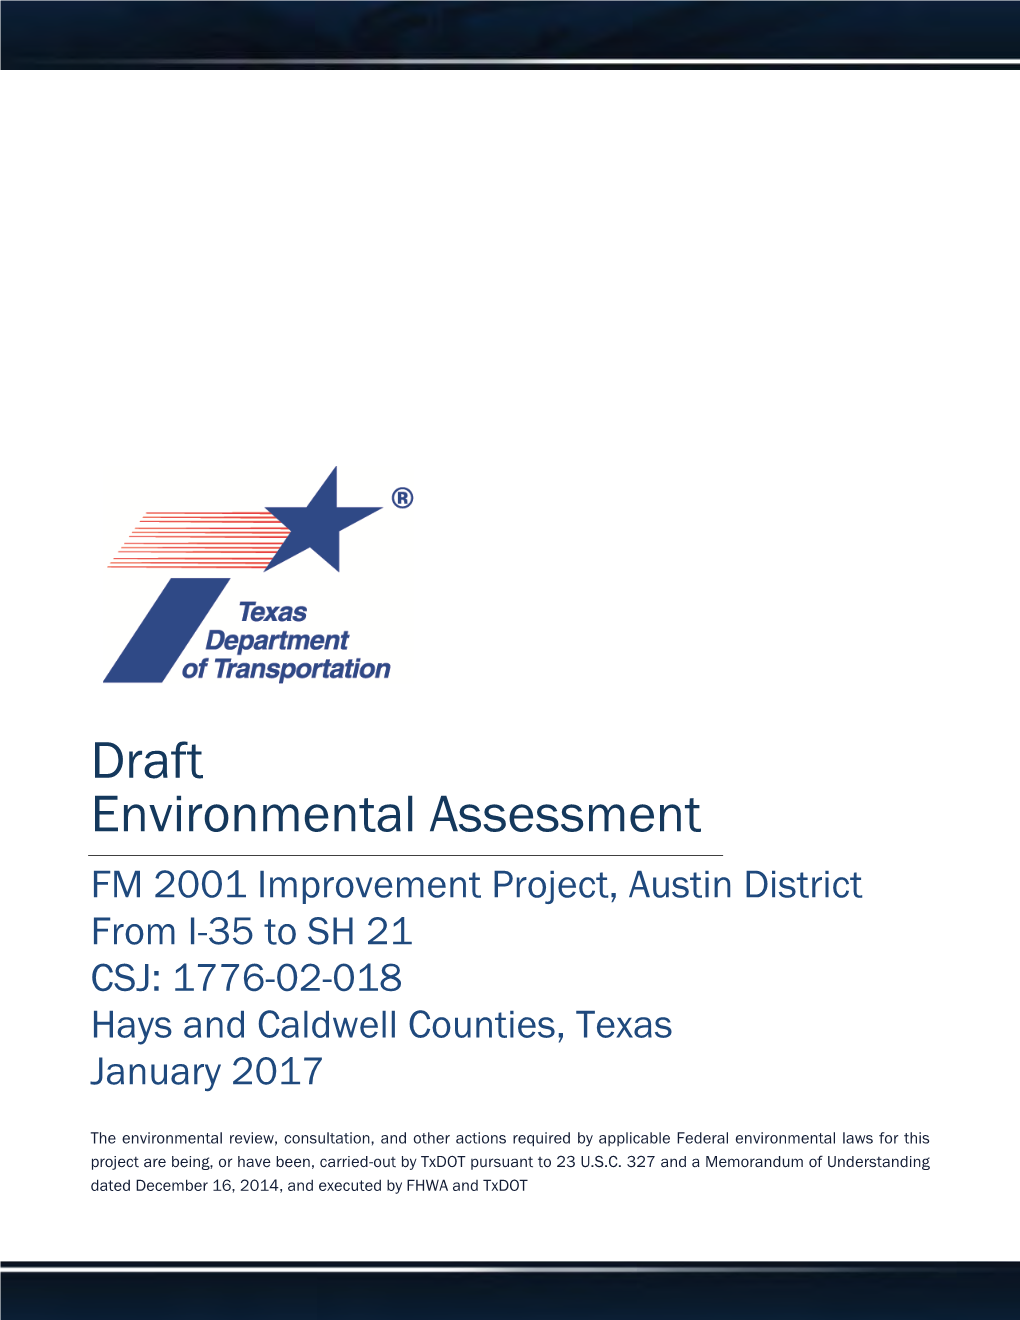 Draft Environmental Assessment FM 2001 Improvement Project, Austin District from I-35 to SH 21 CSJ: 1776-02-018 Hays and Caldwell Counties, Texas January 2017